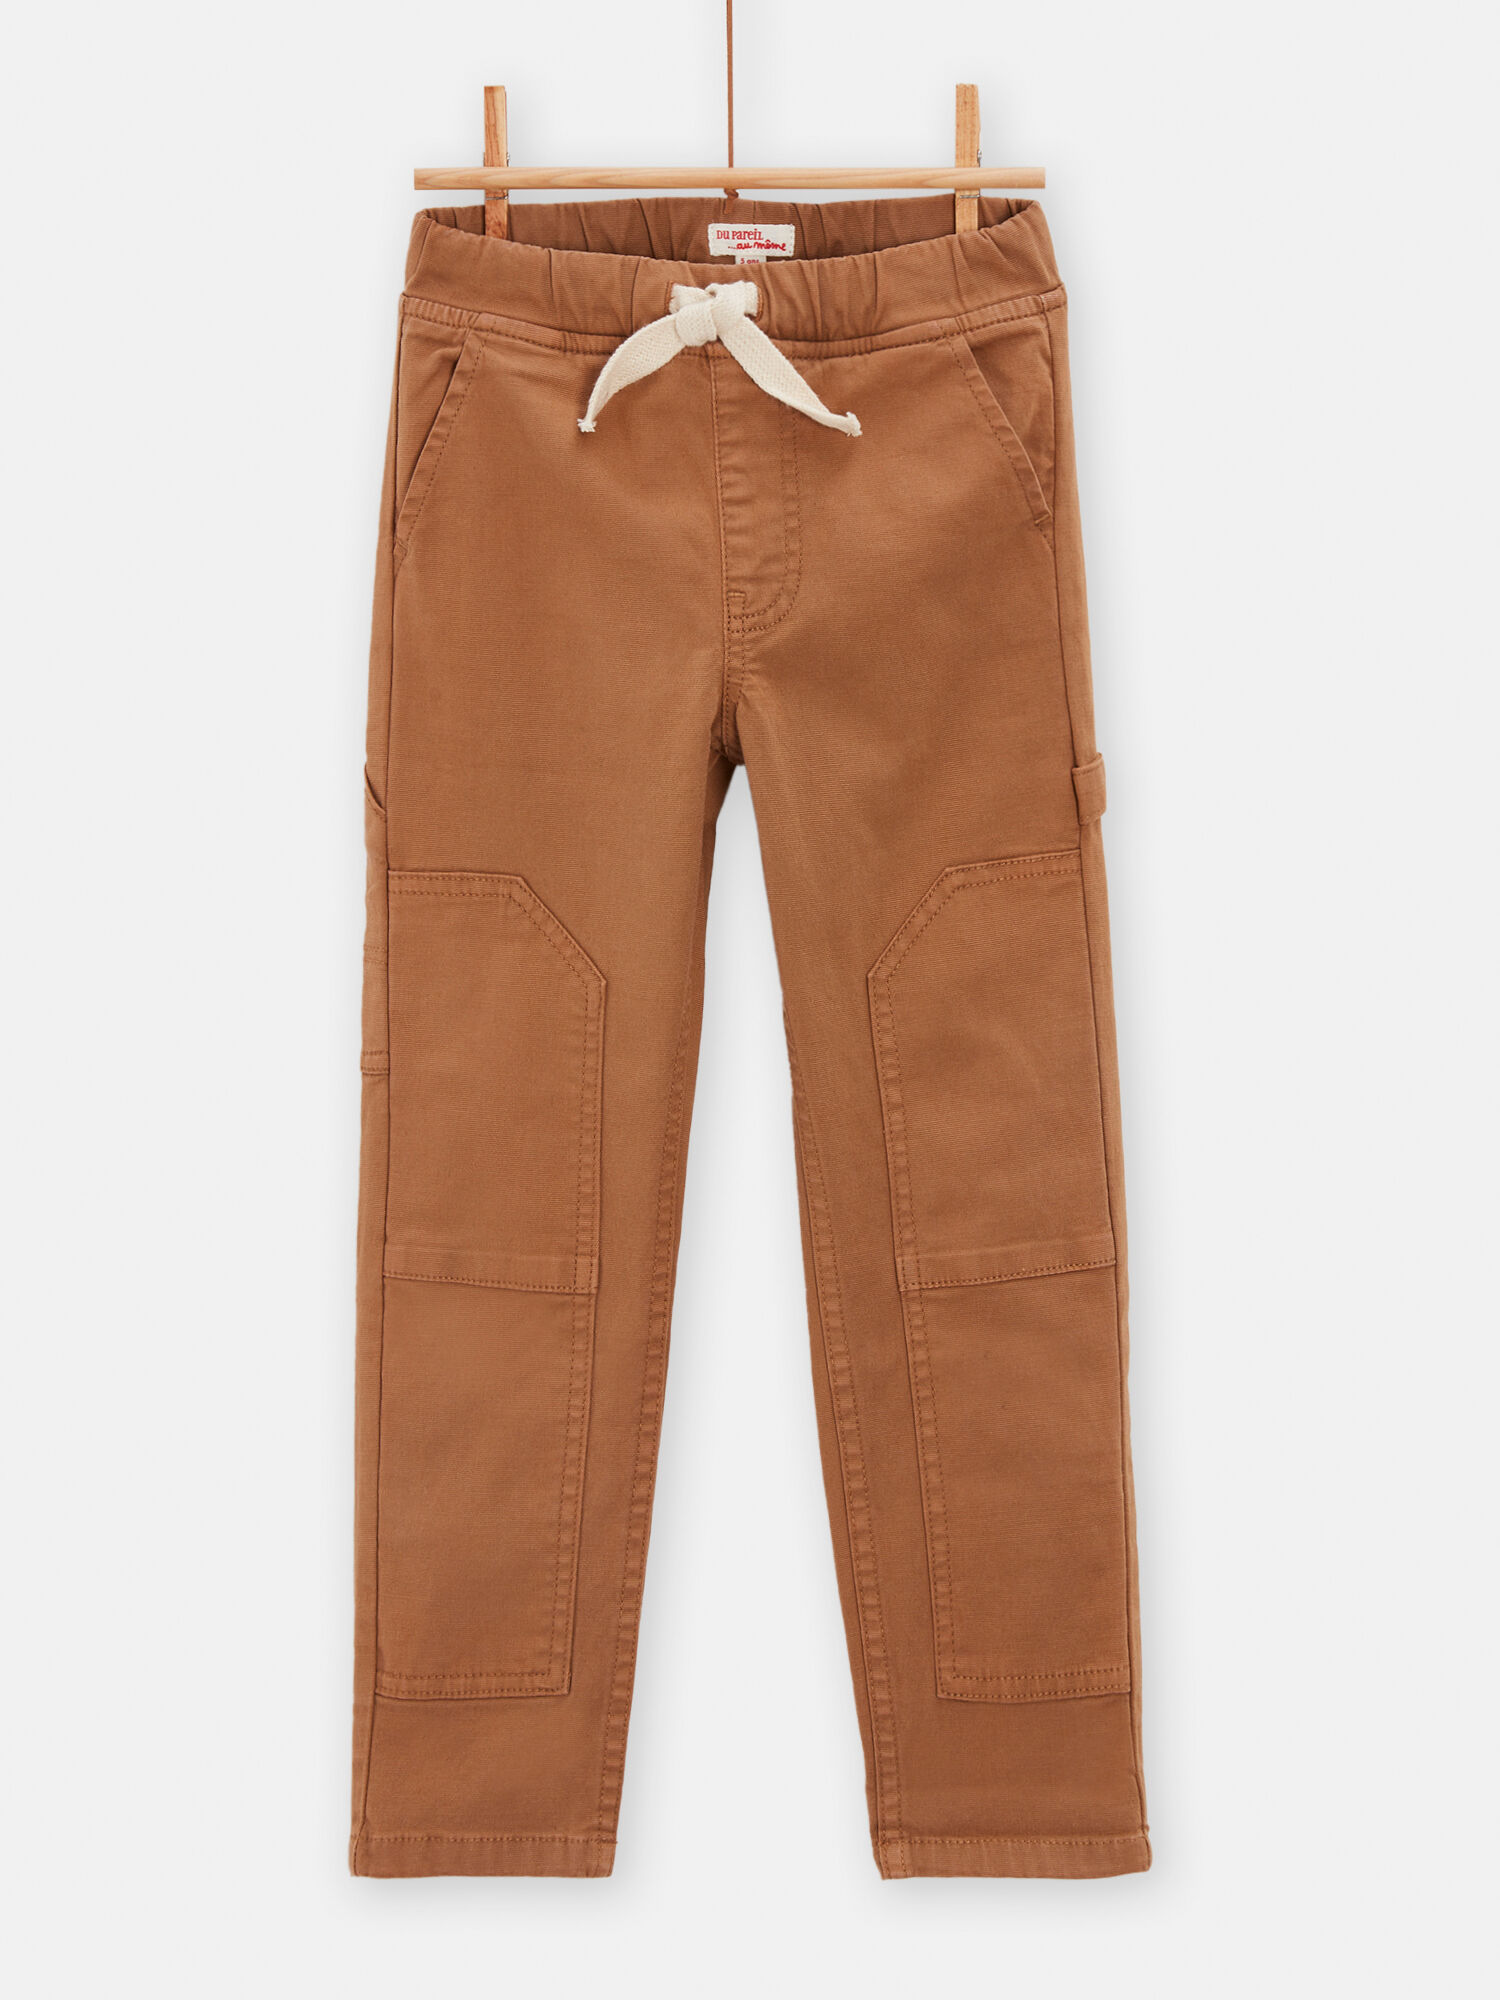 Boys Brown Trousers - Buy Boys Brown Trousers online in India